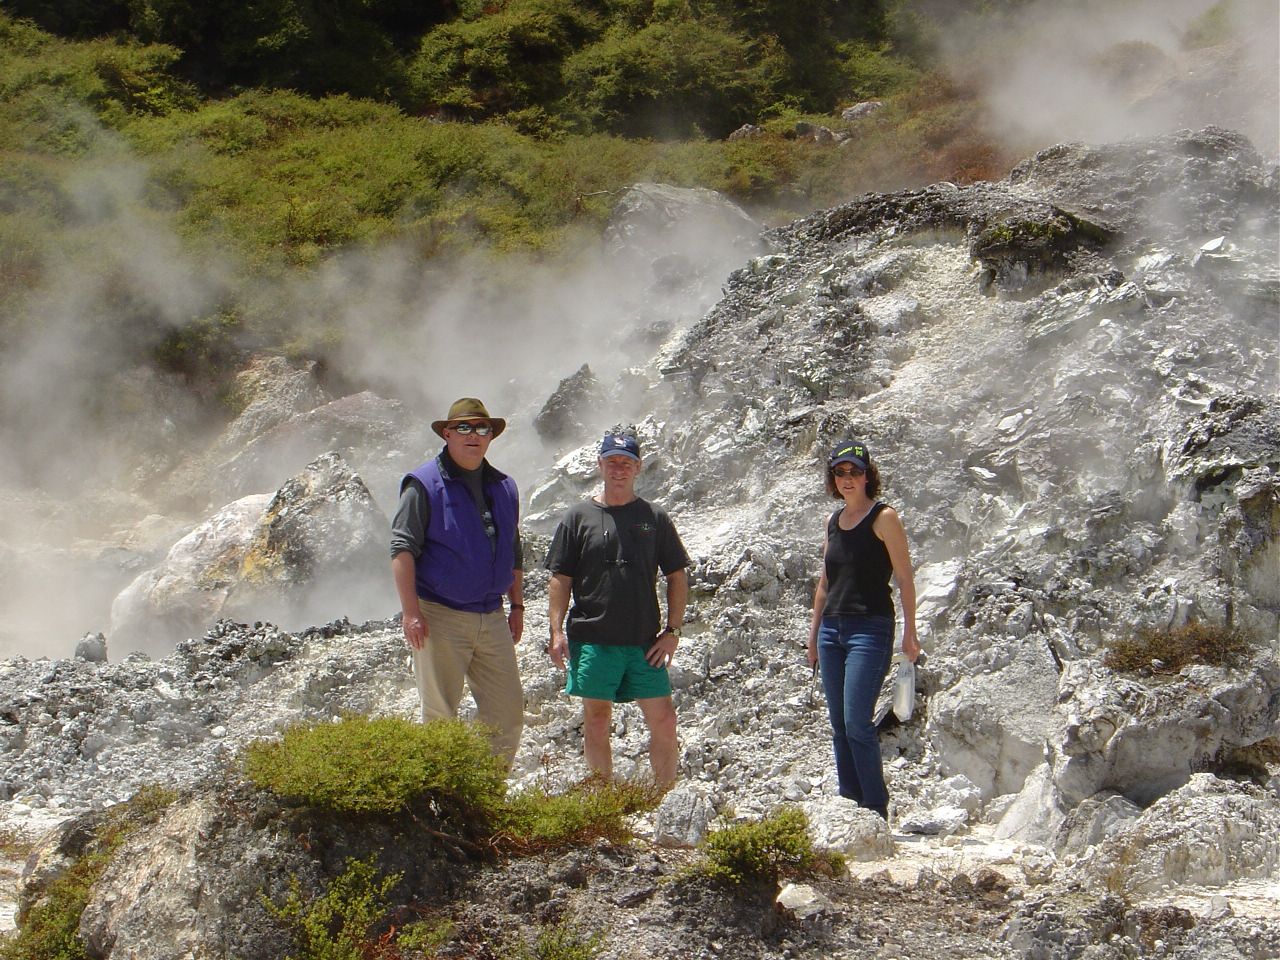 Jack Farmer, RS Perry and Bridget Lynne exploring New Zealand's hot springs.